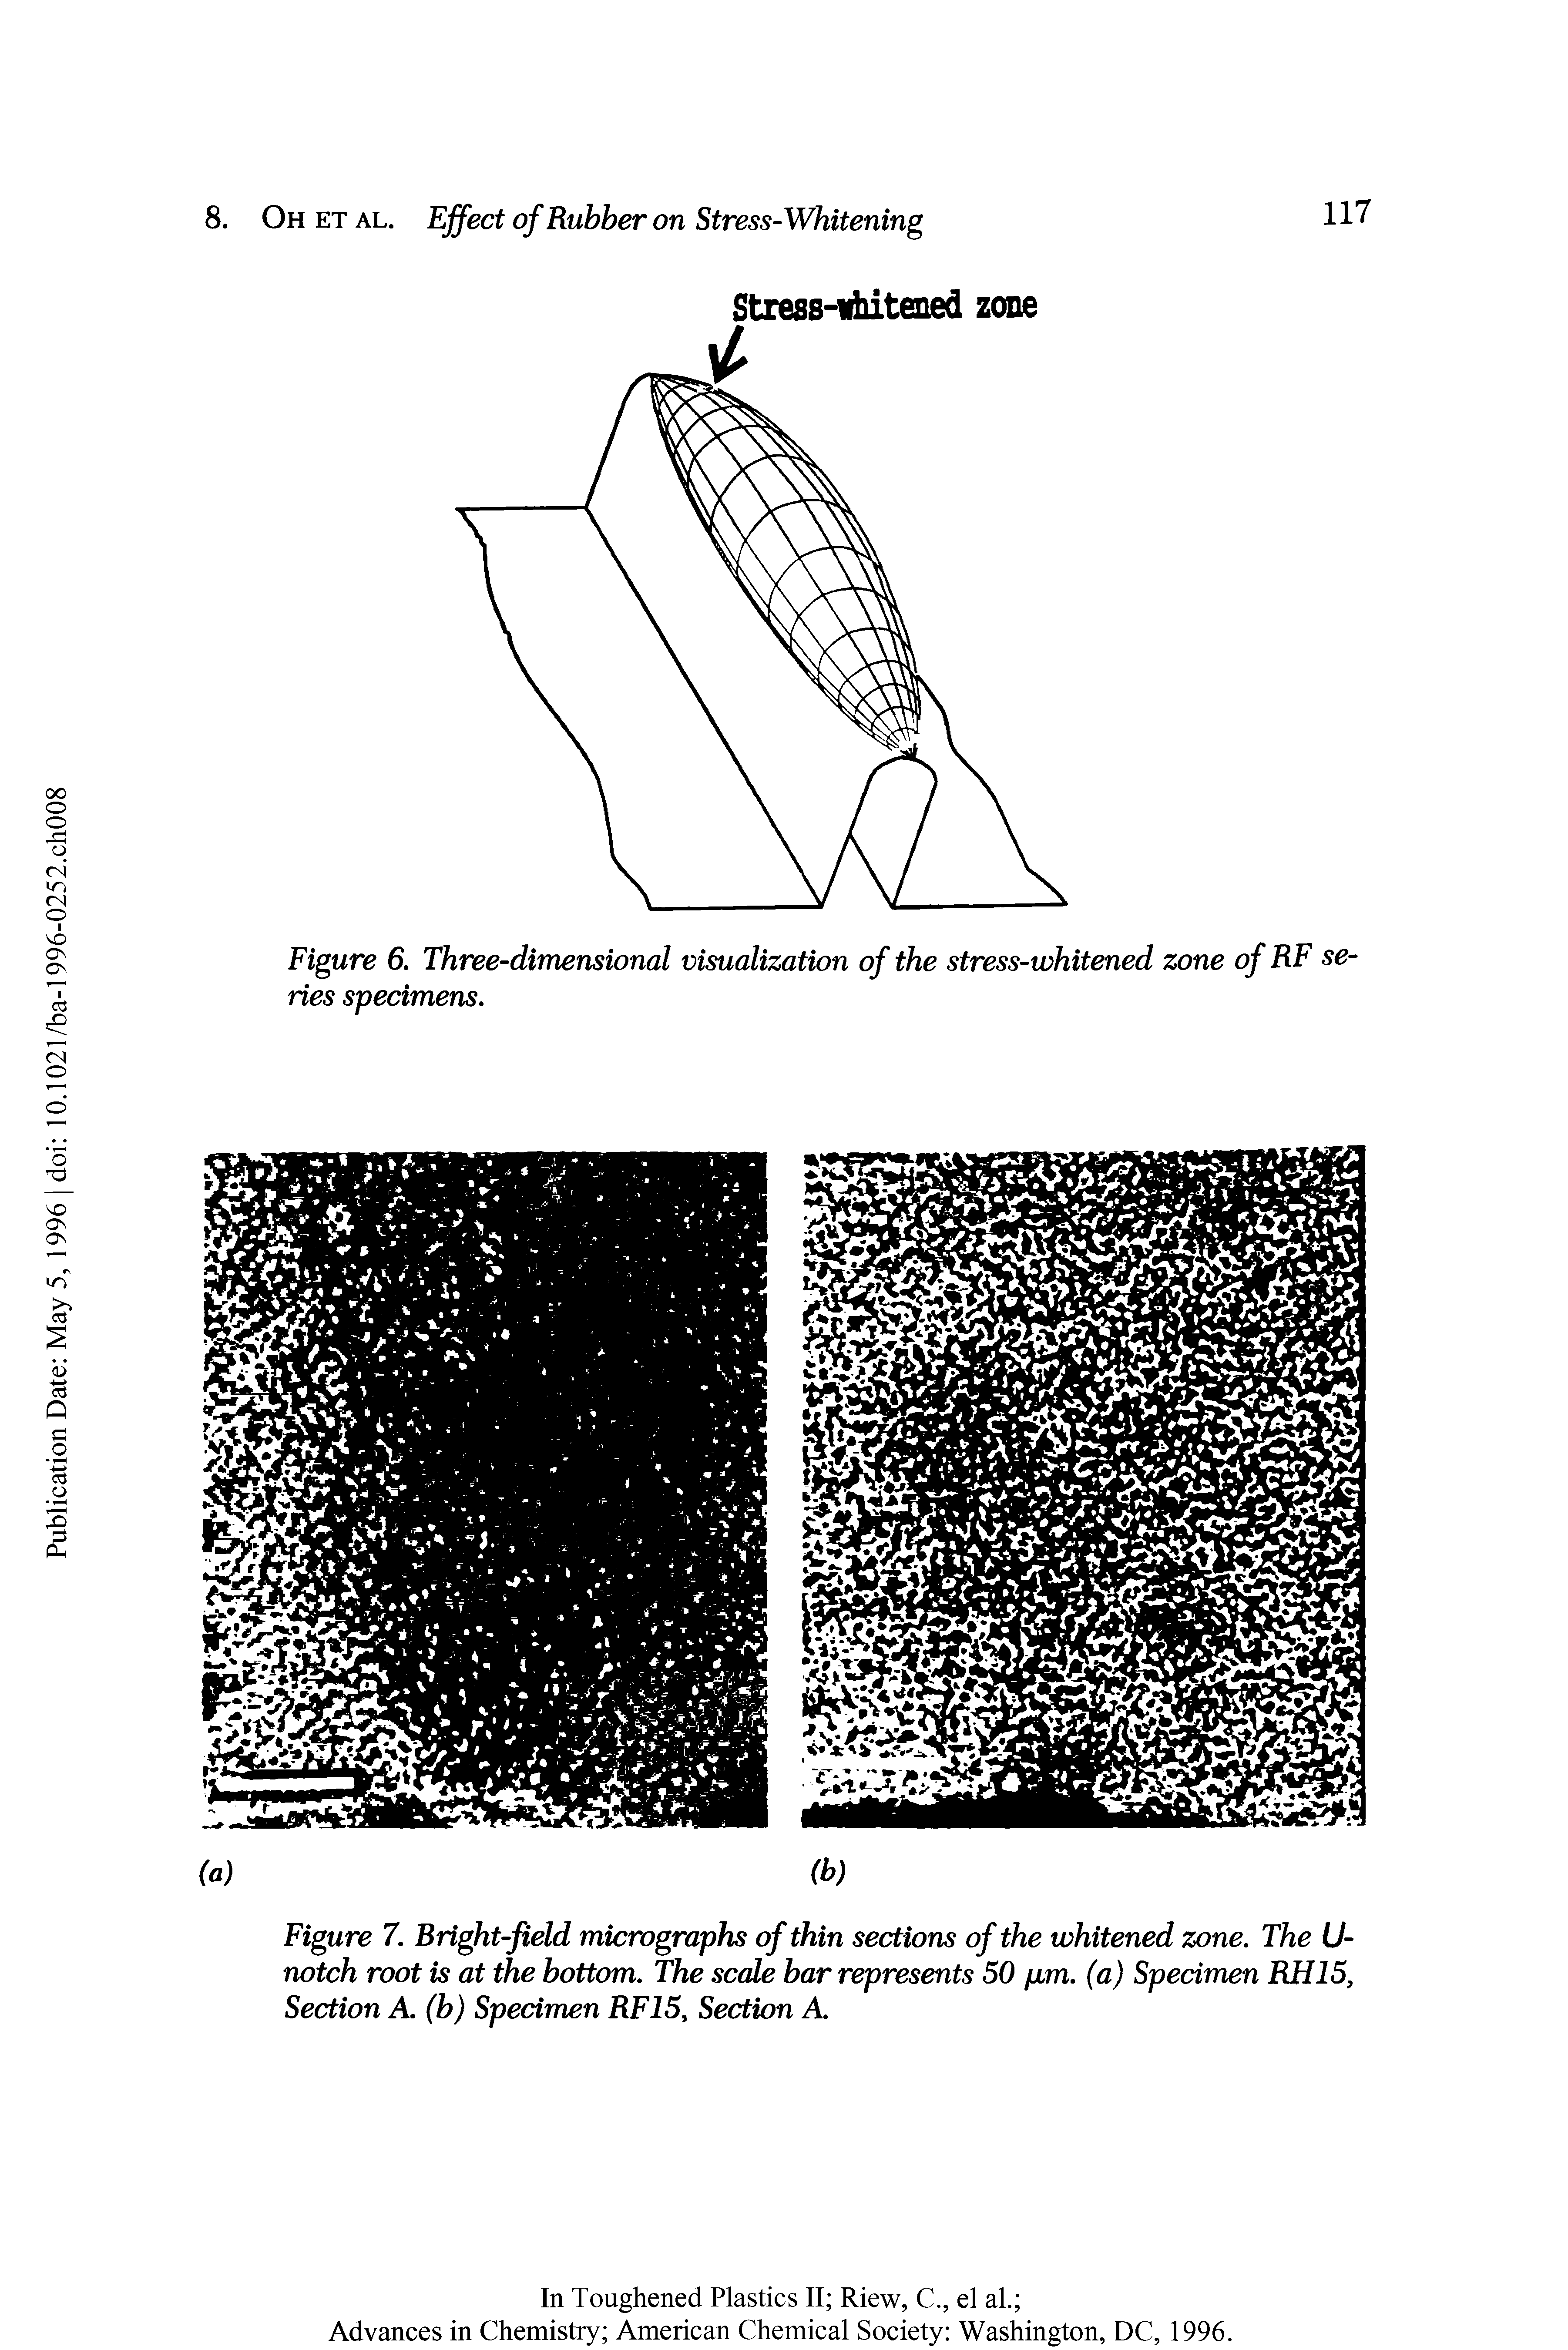 Figure 7. Bright-field micrographs of thin sections of the whitened zone. The U-notch root is at the bottom. The scale bar represents 50 pm. (a) Specimen RH15, Section A. (b) Specimen RF15, Section A.